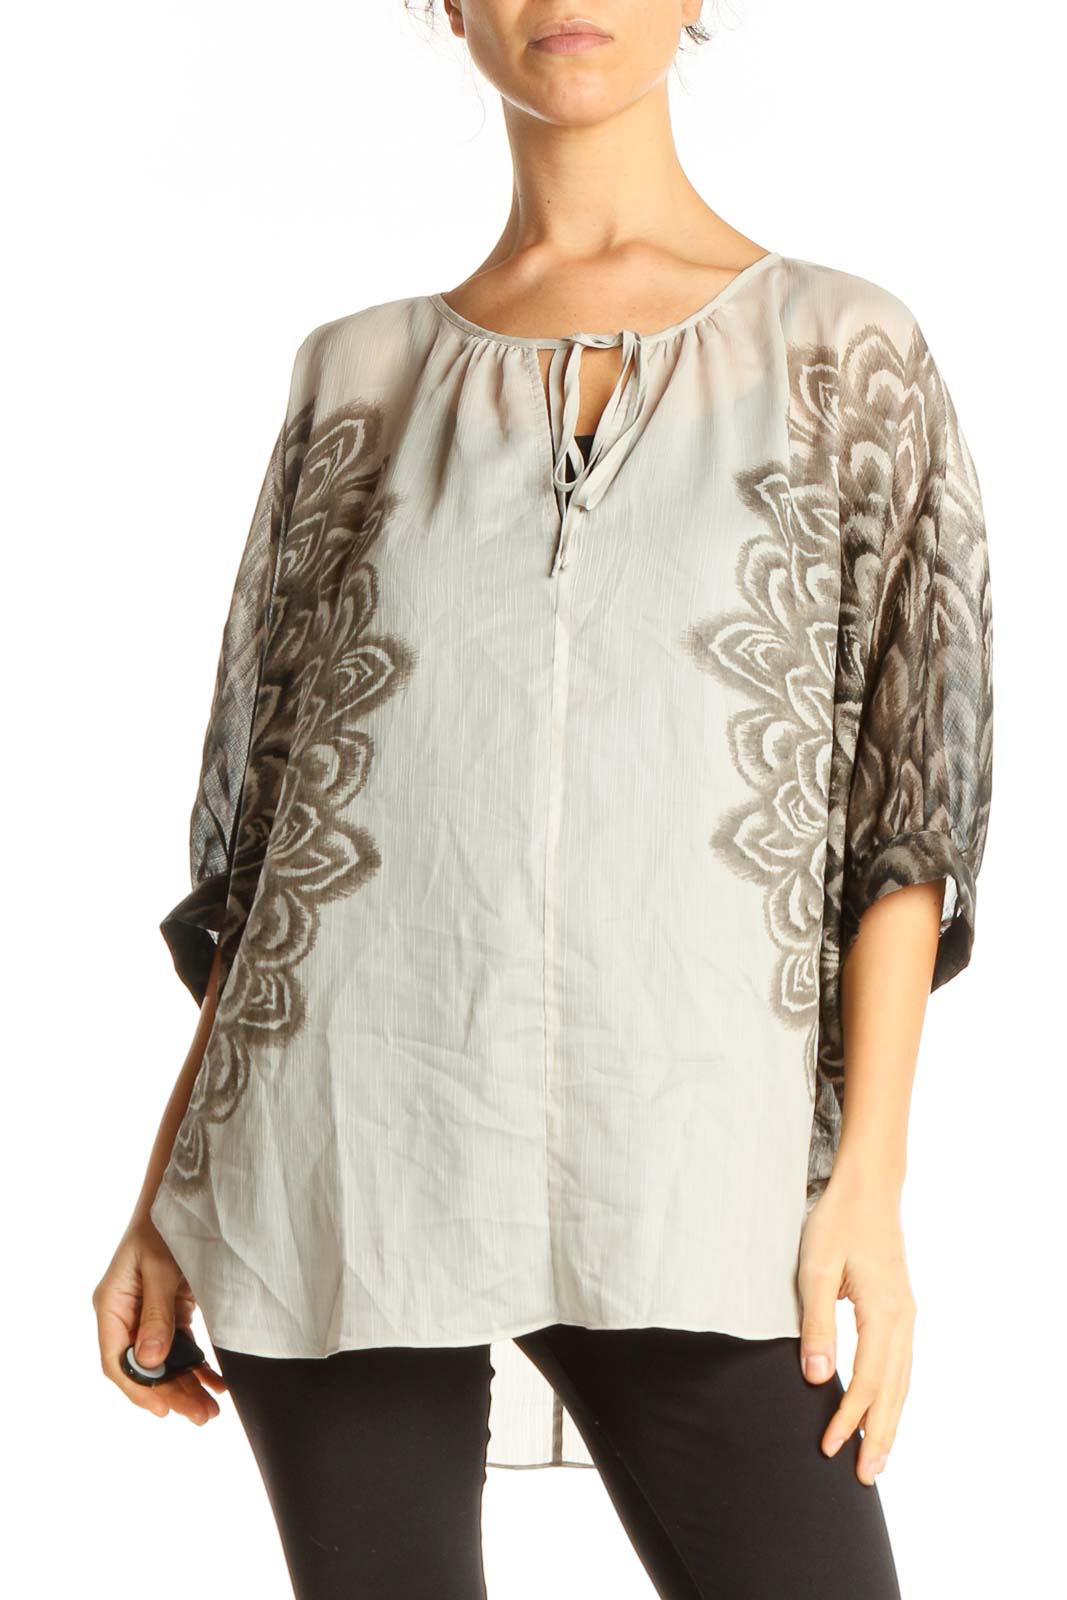 Gray Printed Retro Blouse Front